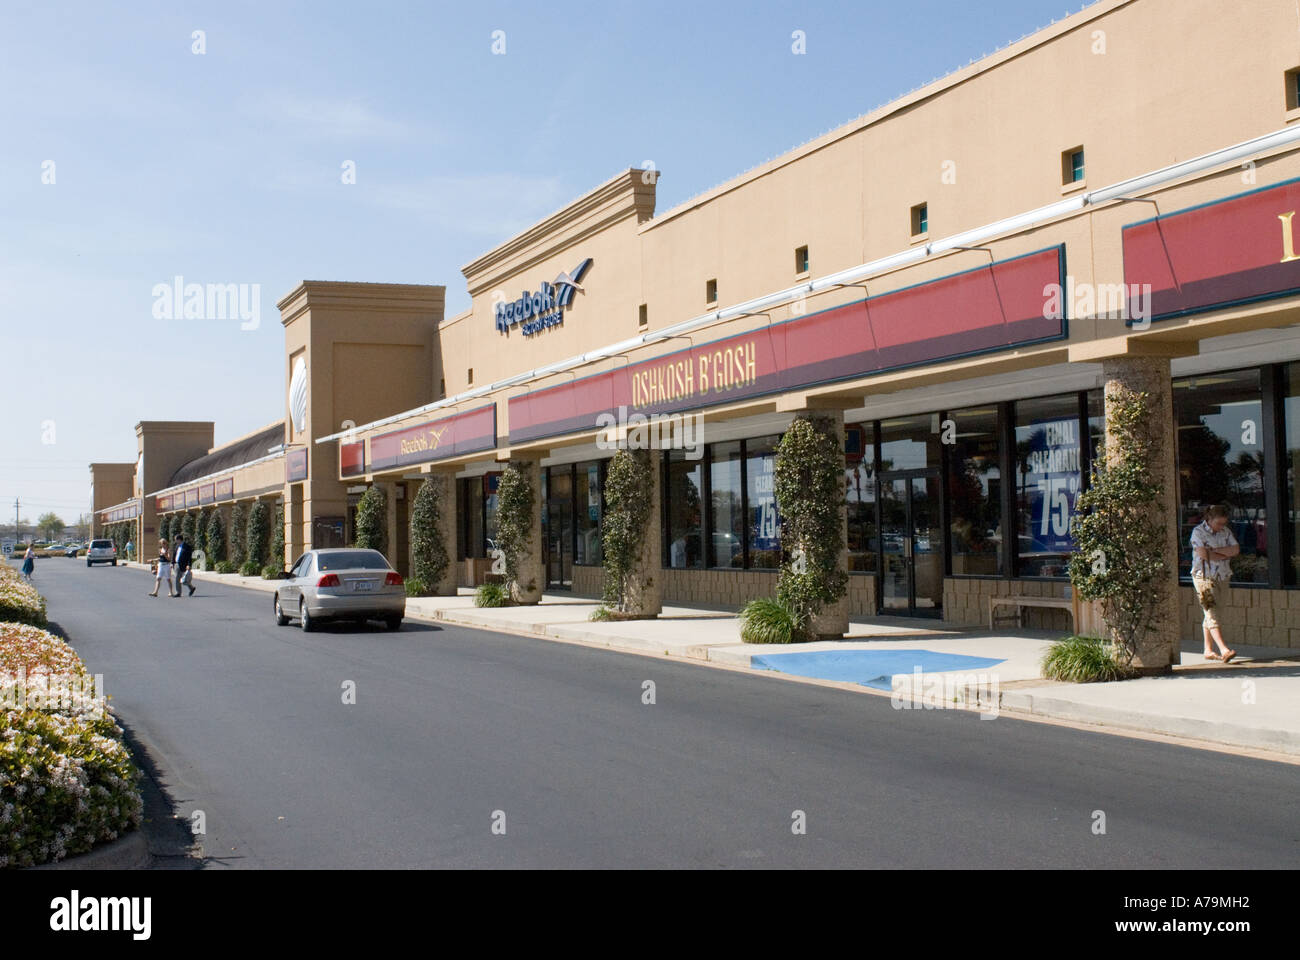 Large factory outlet mall in Destin Florida USA A shopping meca Stock Photo  - Alamy